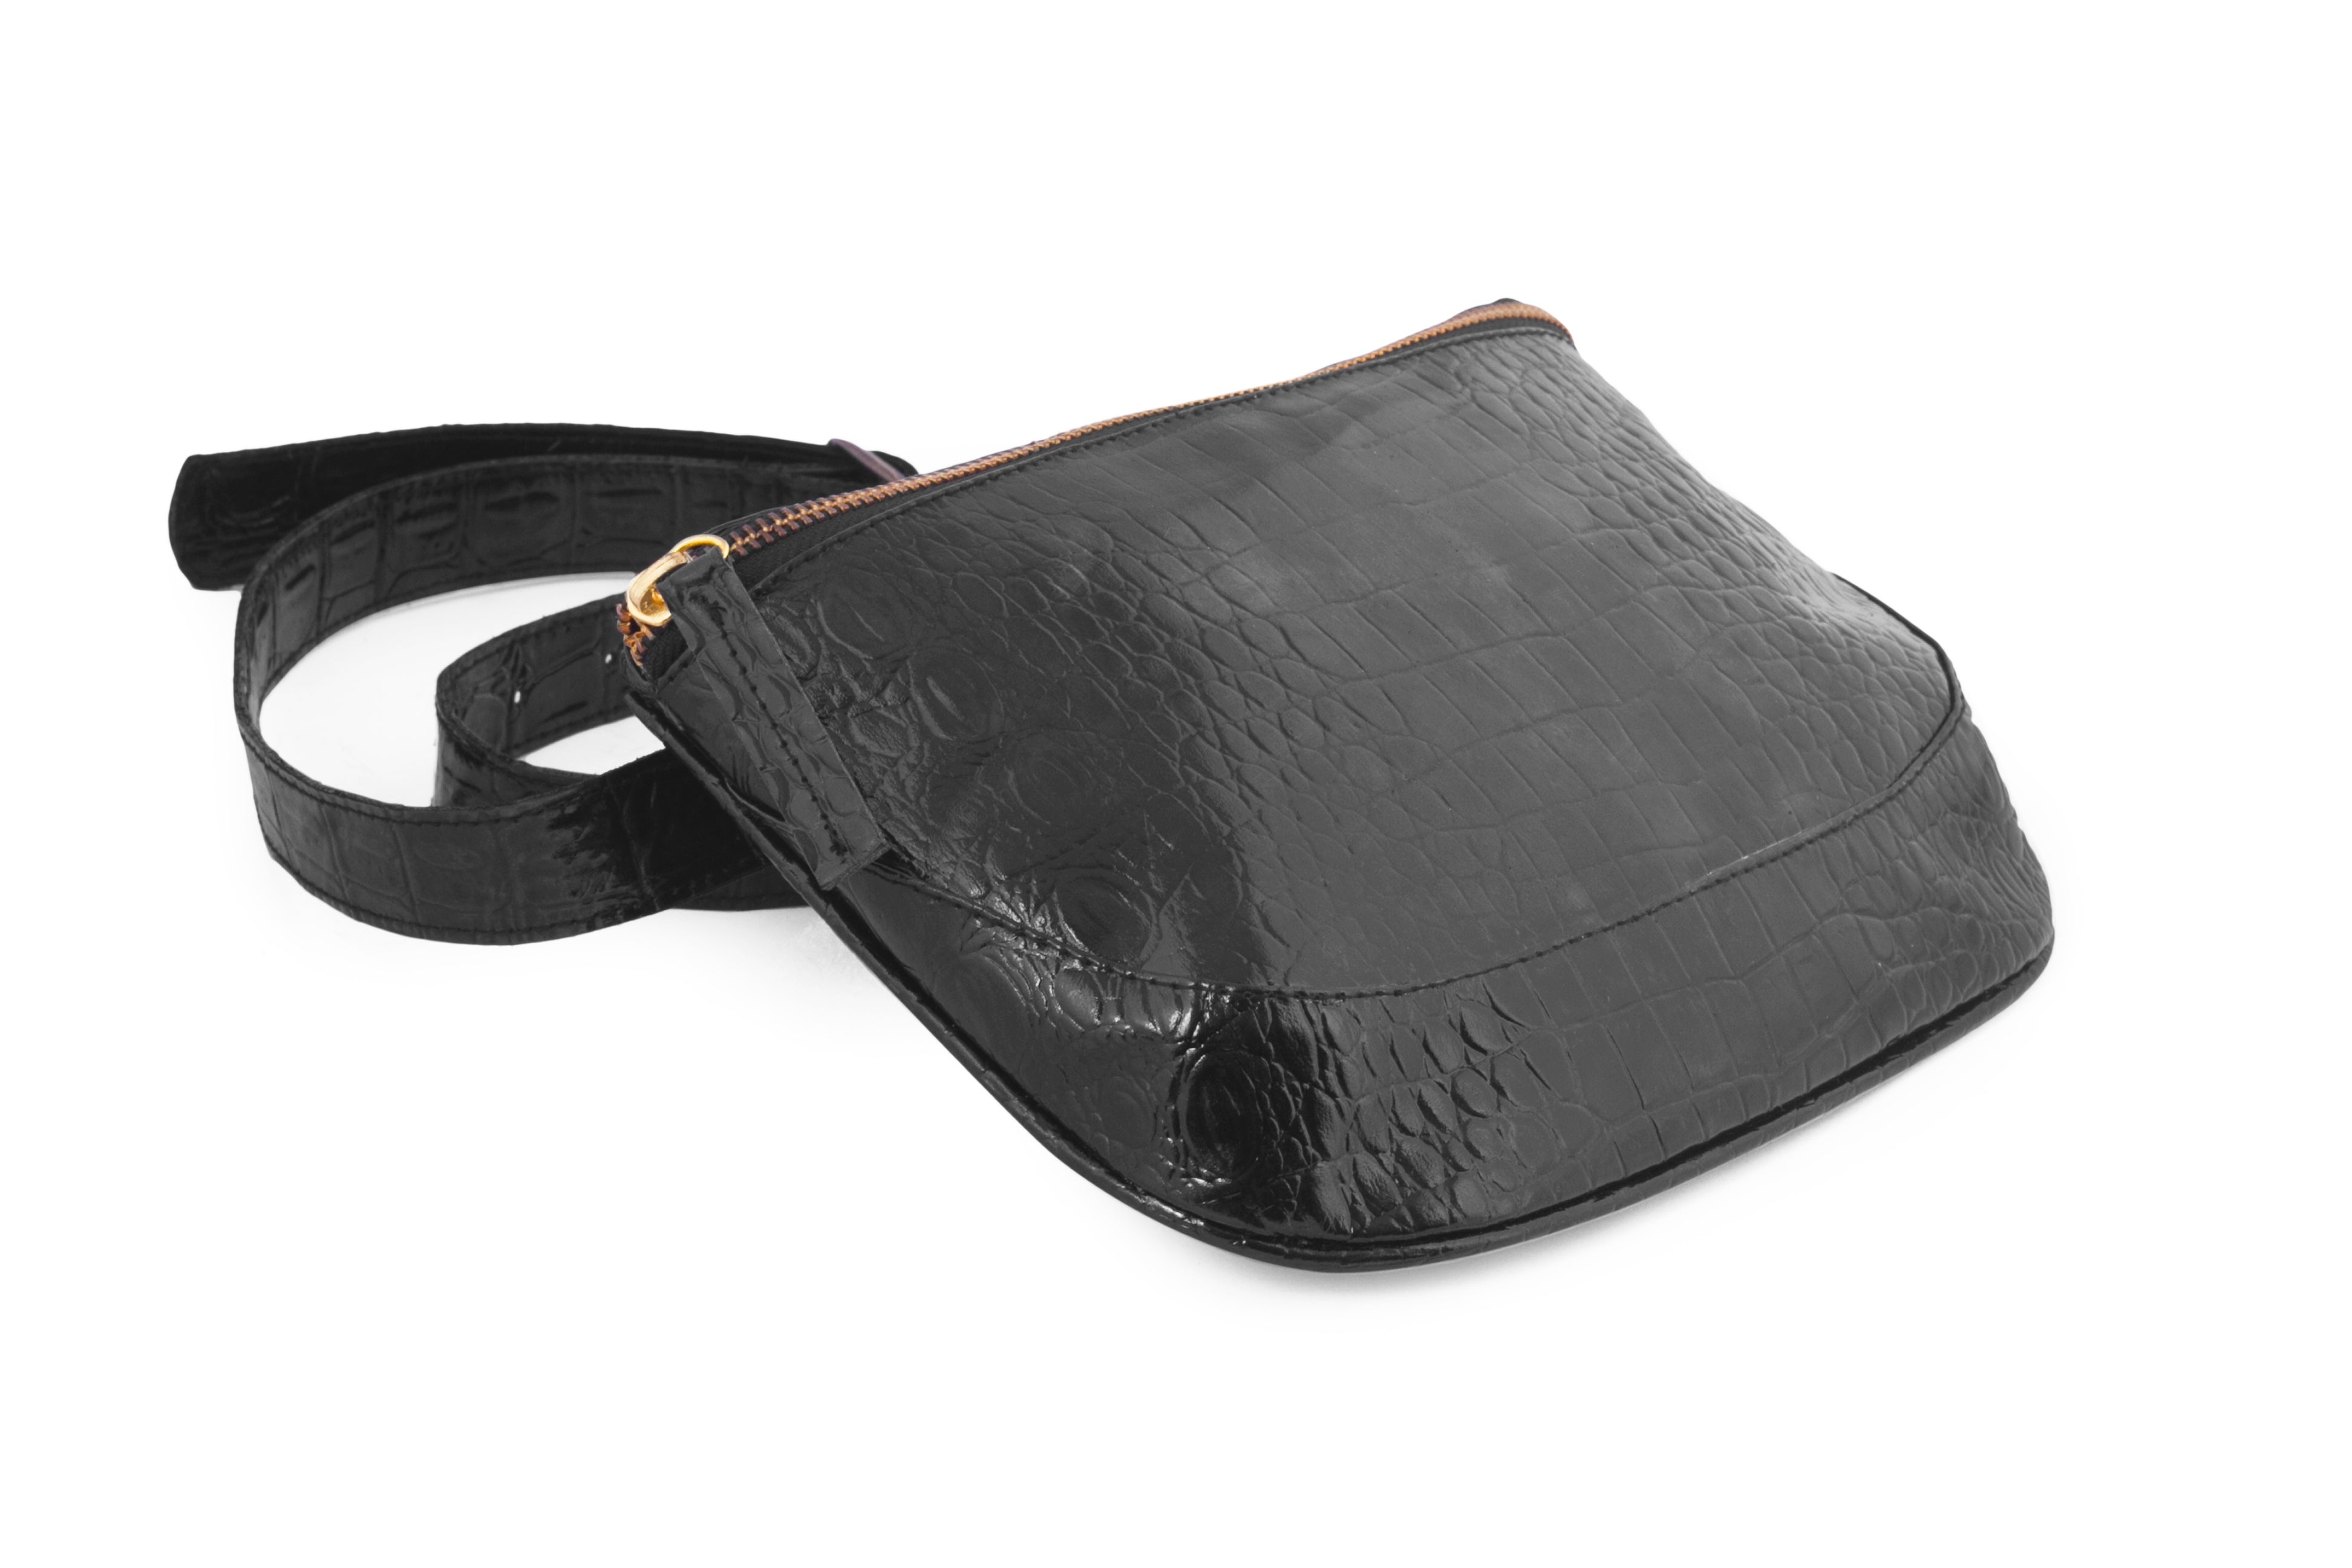 Flat view of black leather fanny pack